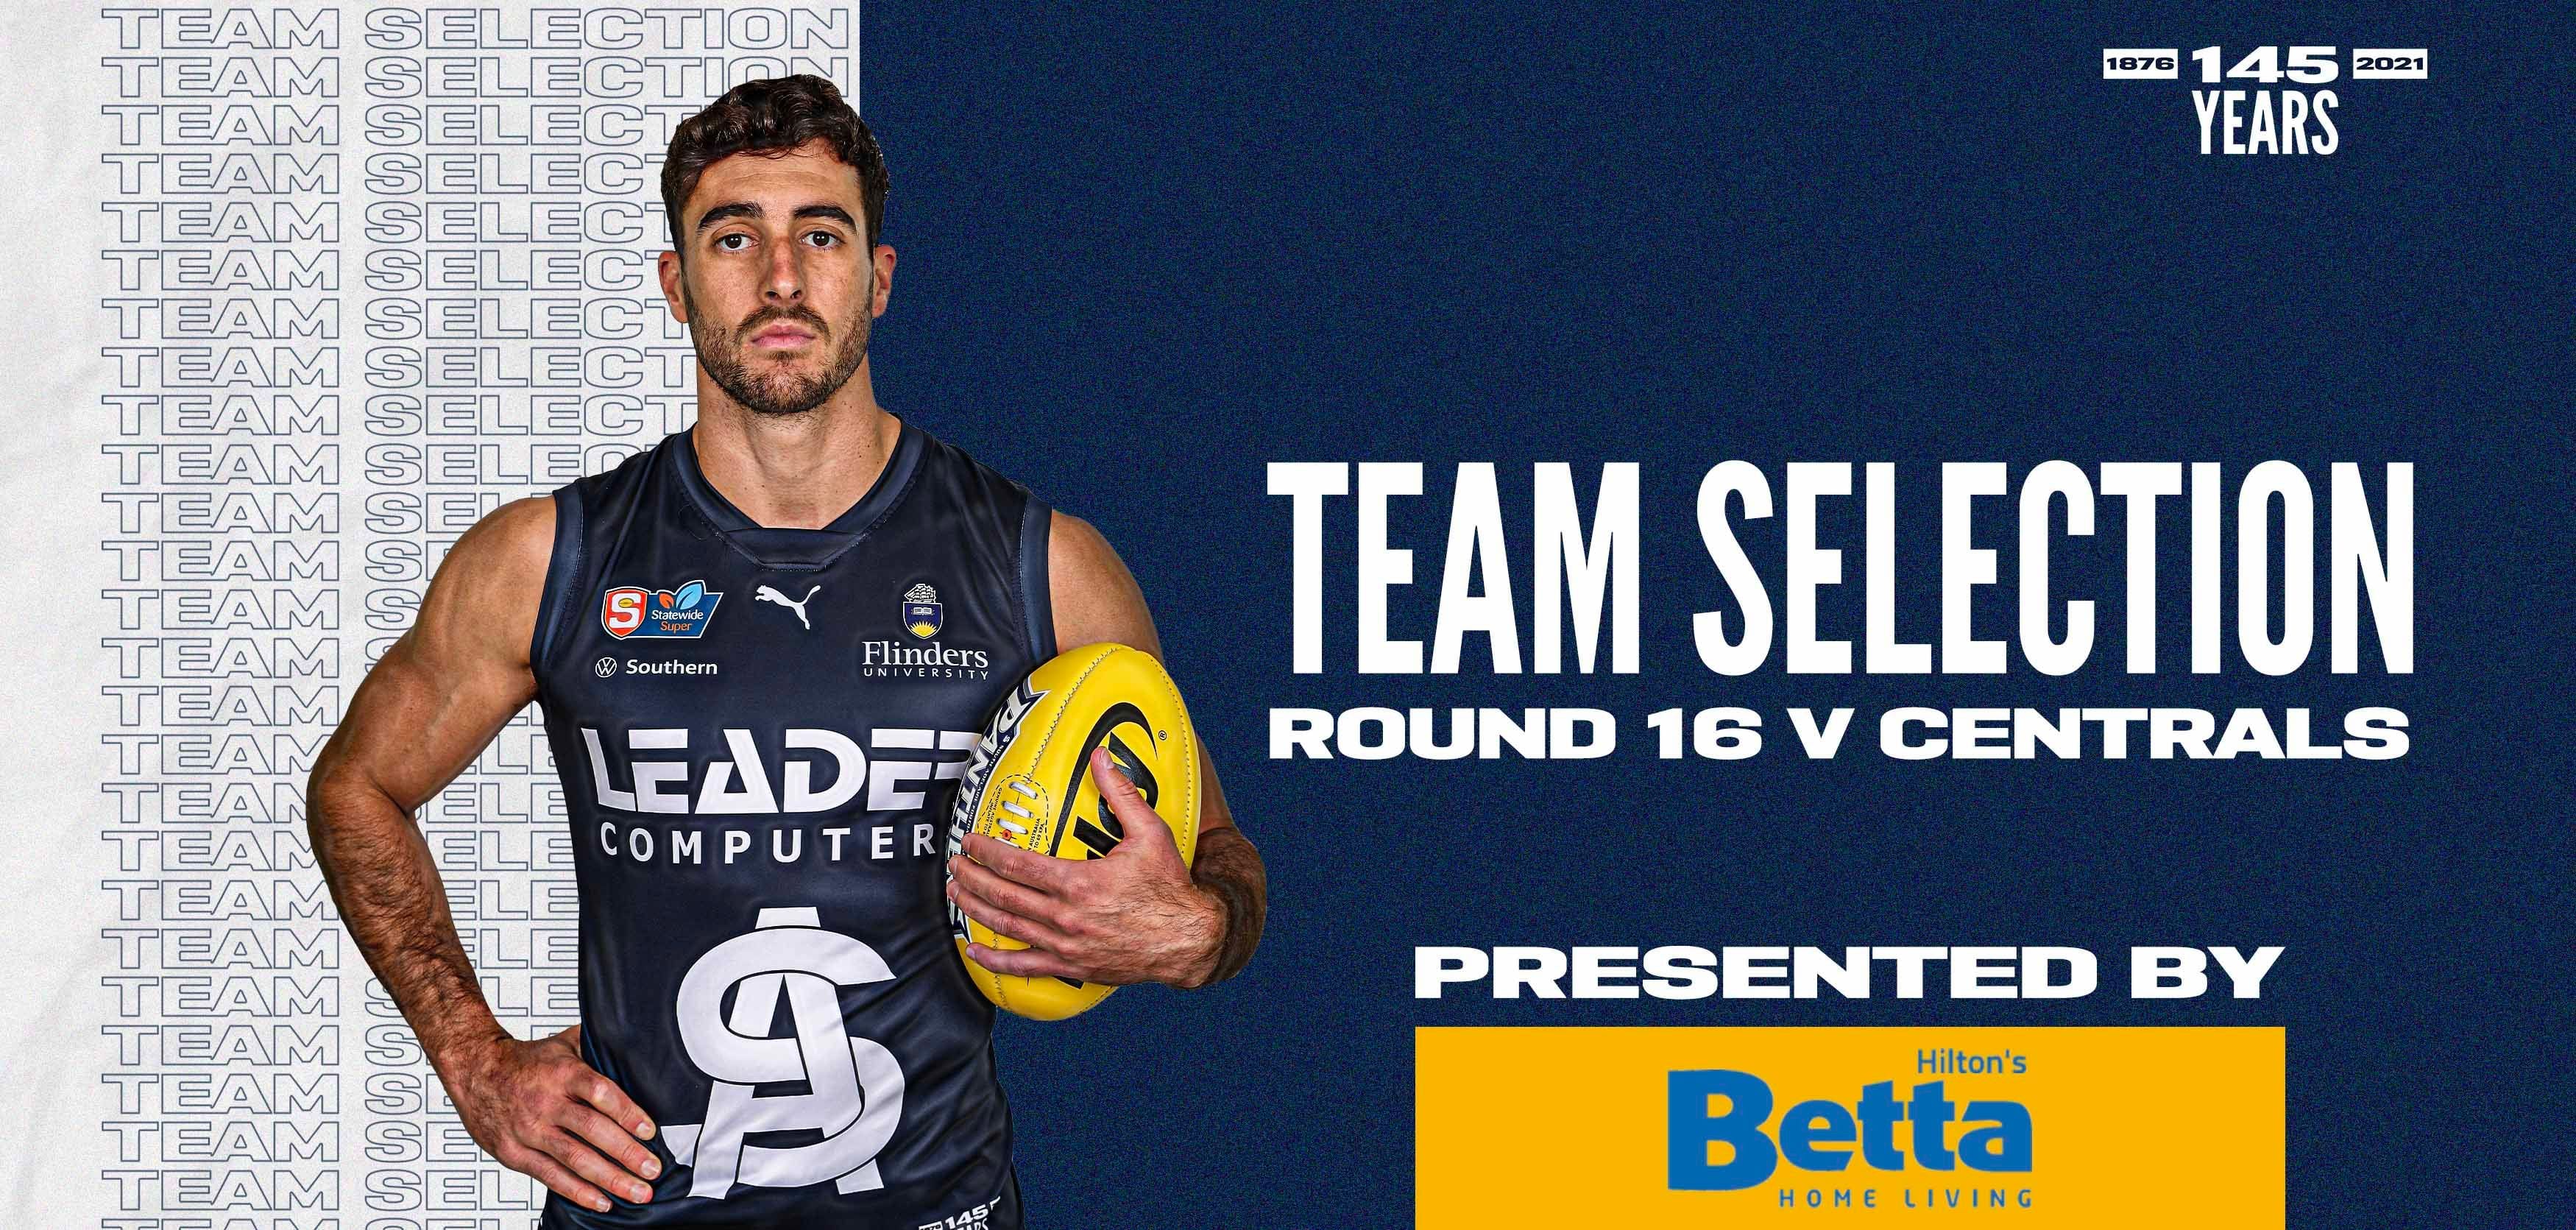 BETTA Teams Selection: Round 16 v Central District